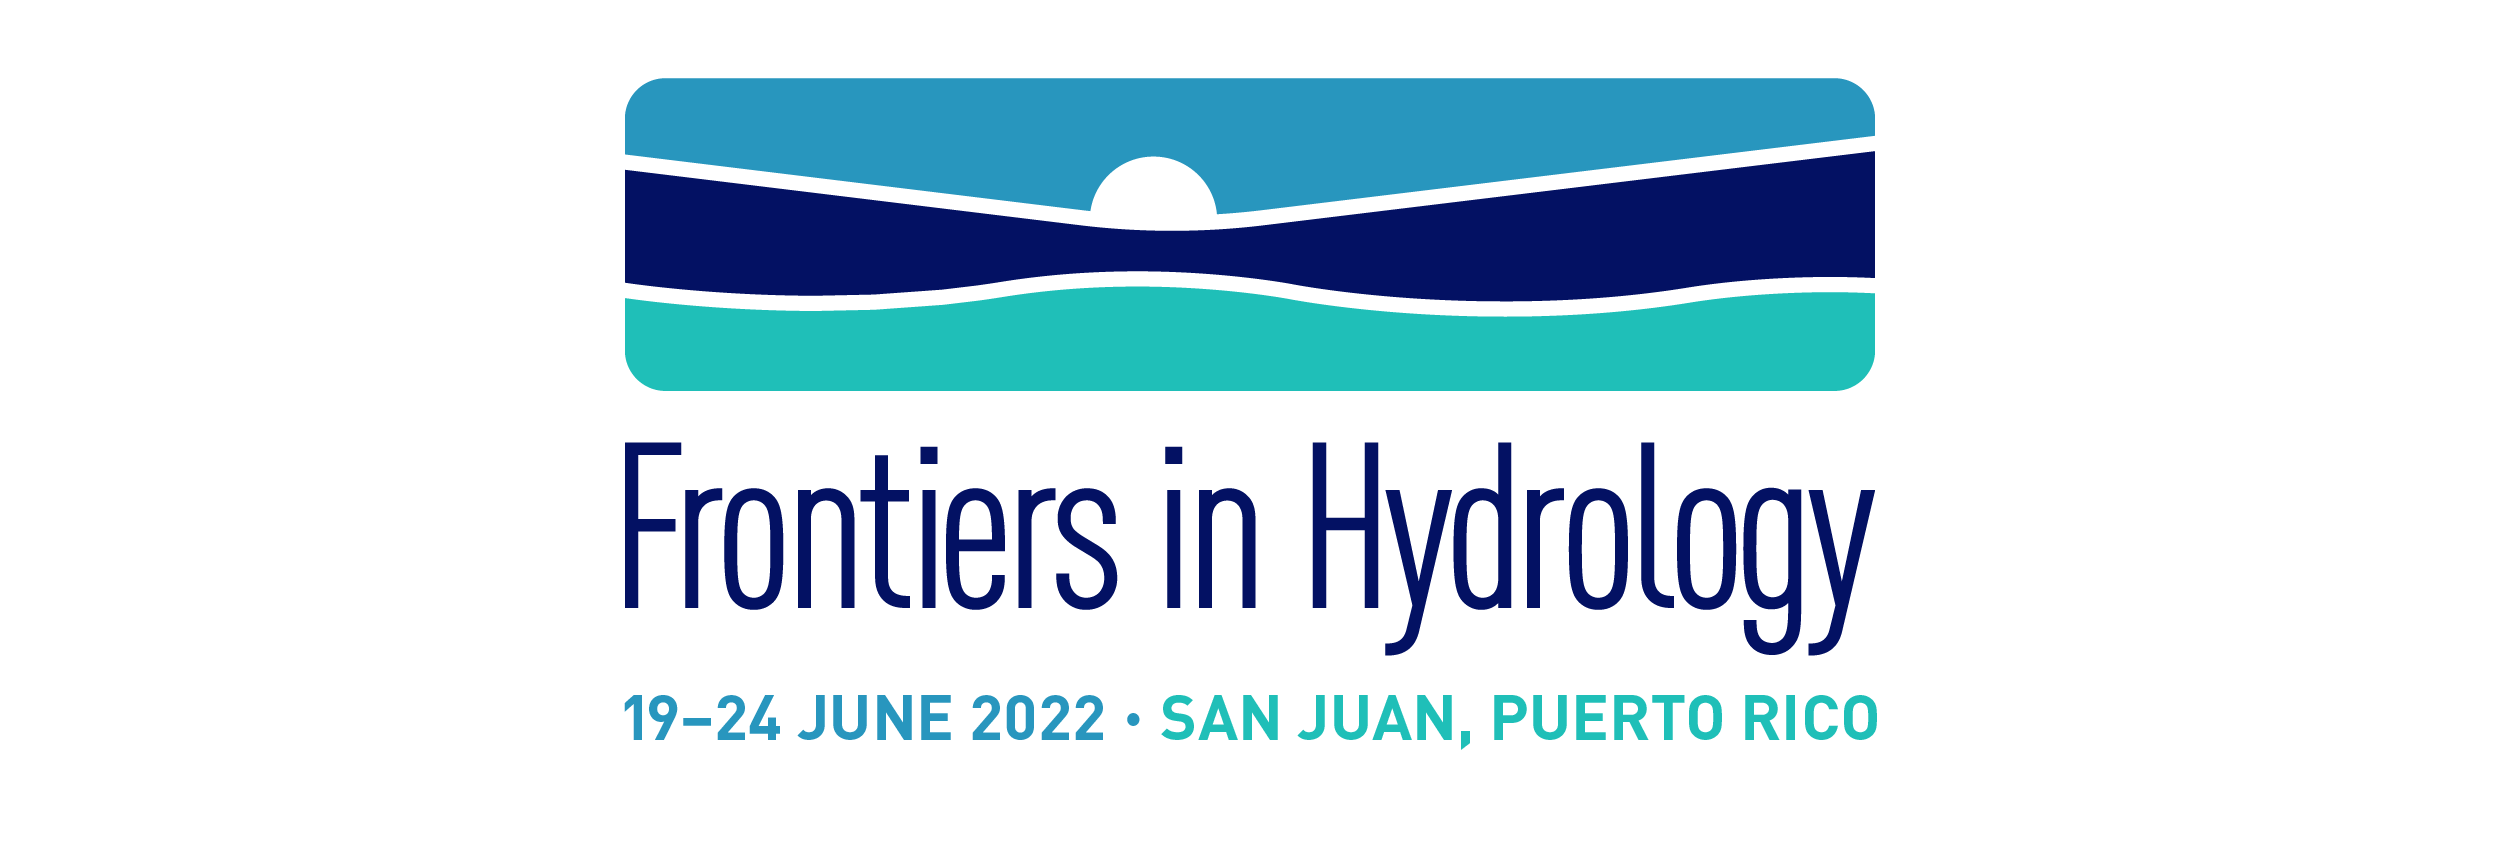 Frontiers in Hydrology Meeting 2022